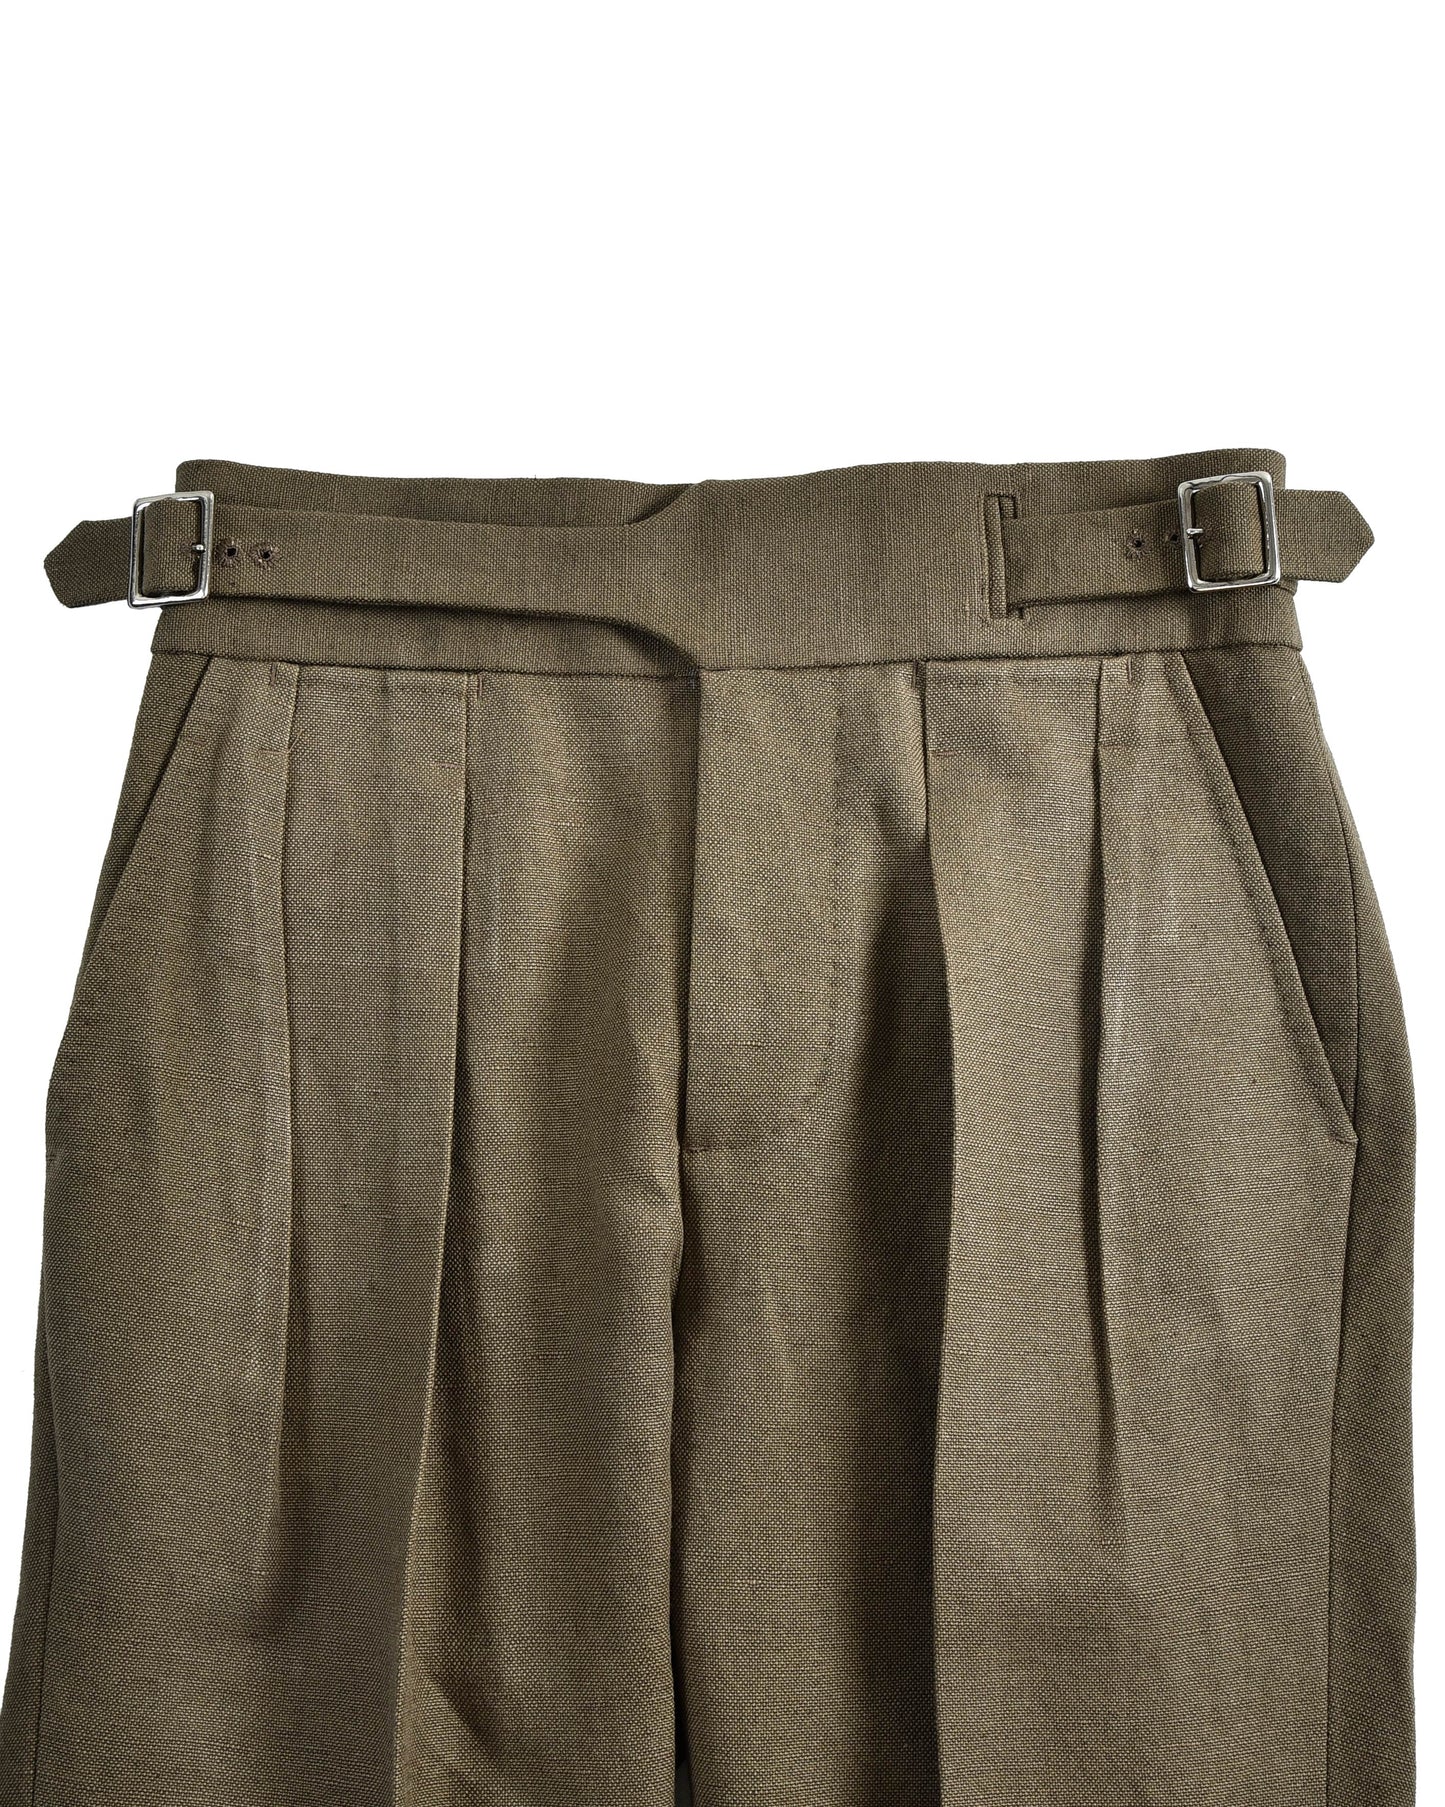 Gurkha Pant in Linen Cotton Canvas Military Olive